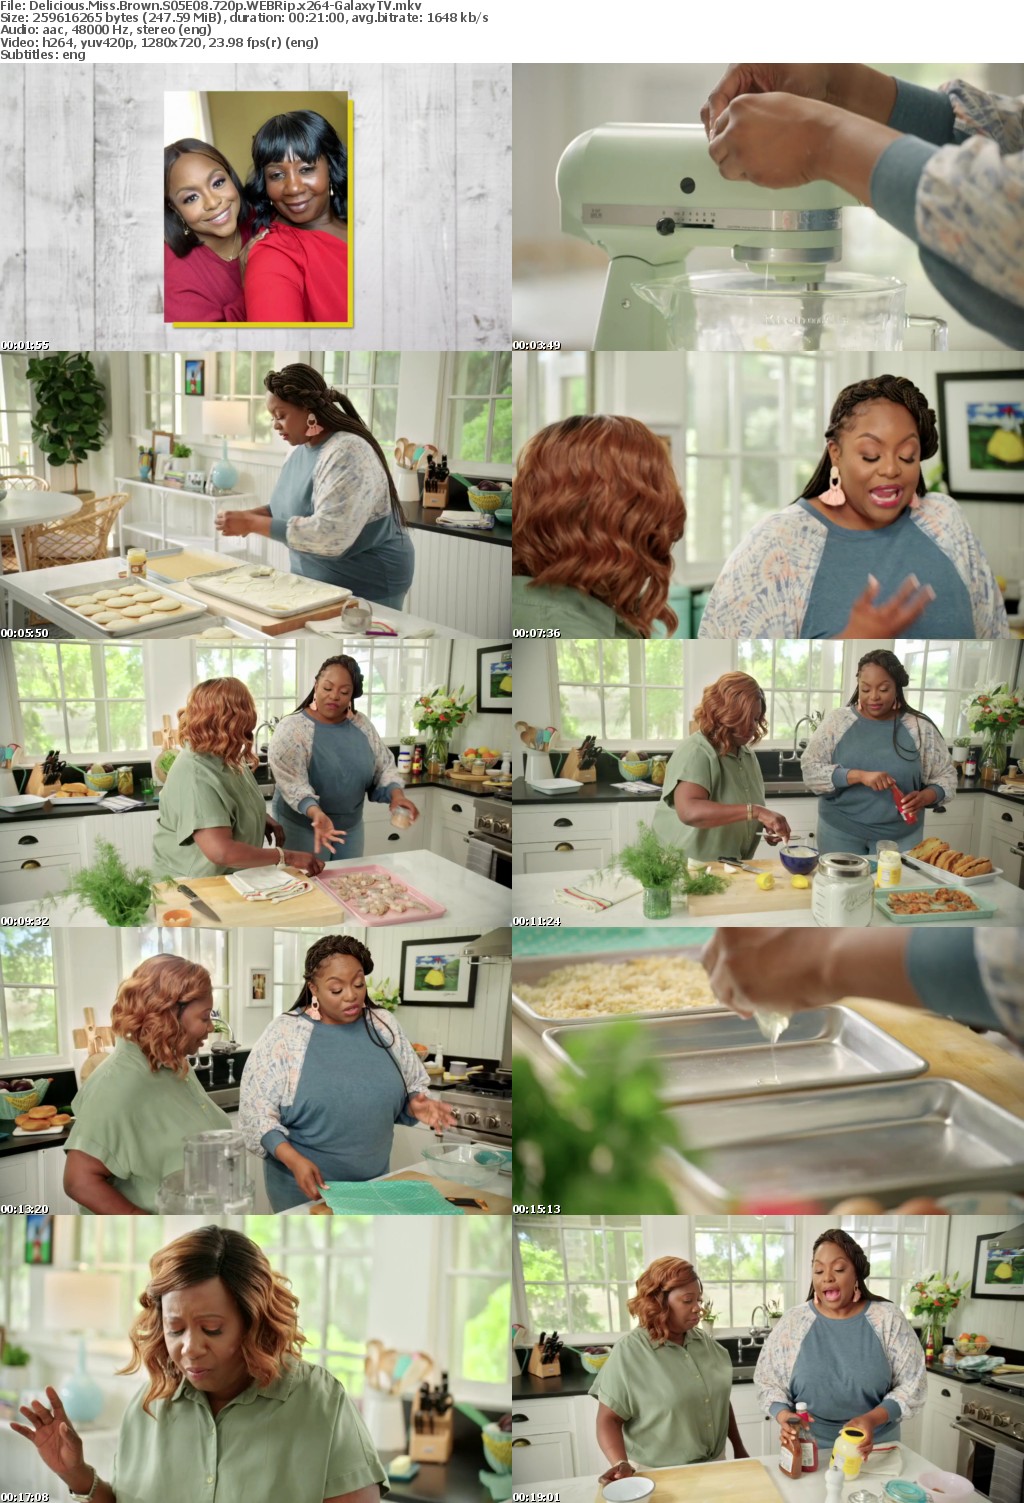 Delicious Miss Brown S05 COMPLETE 720p WEBRip x264-GalaxyTV